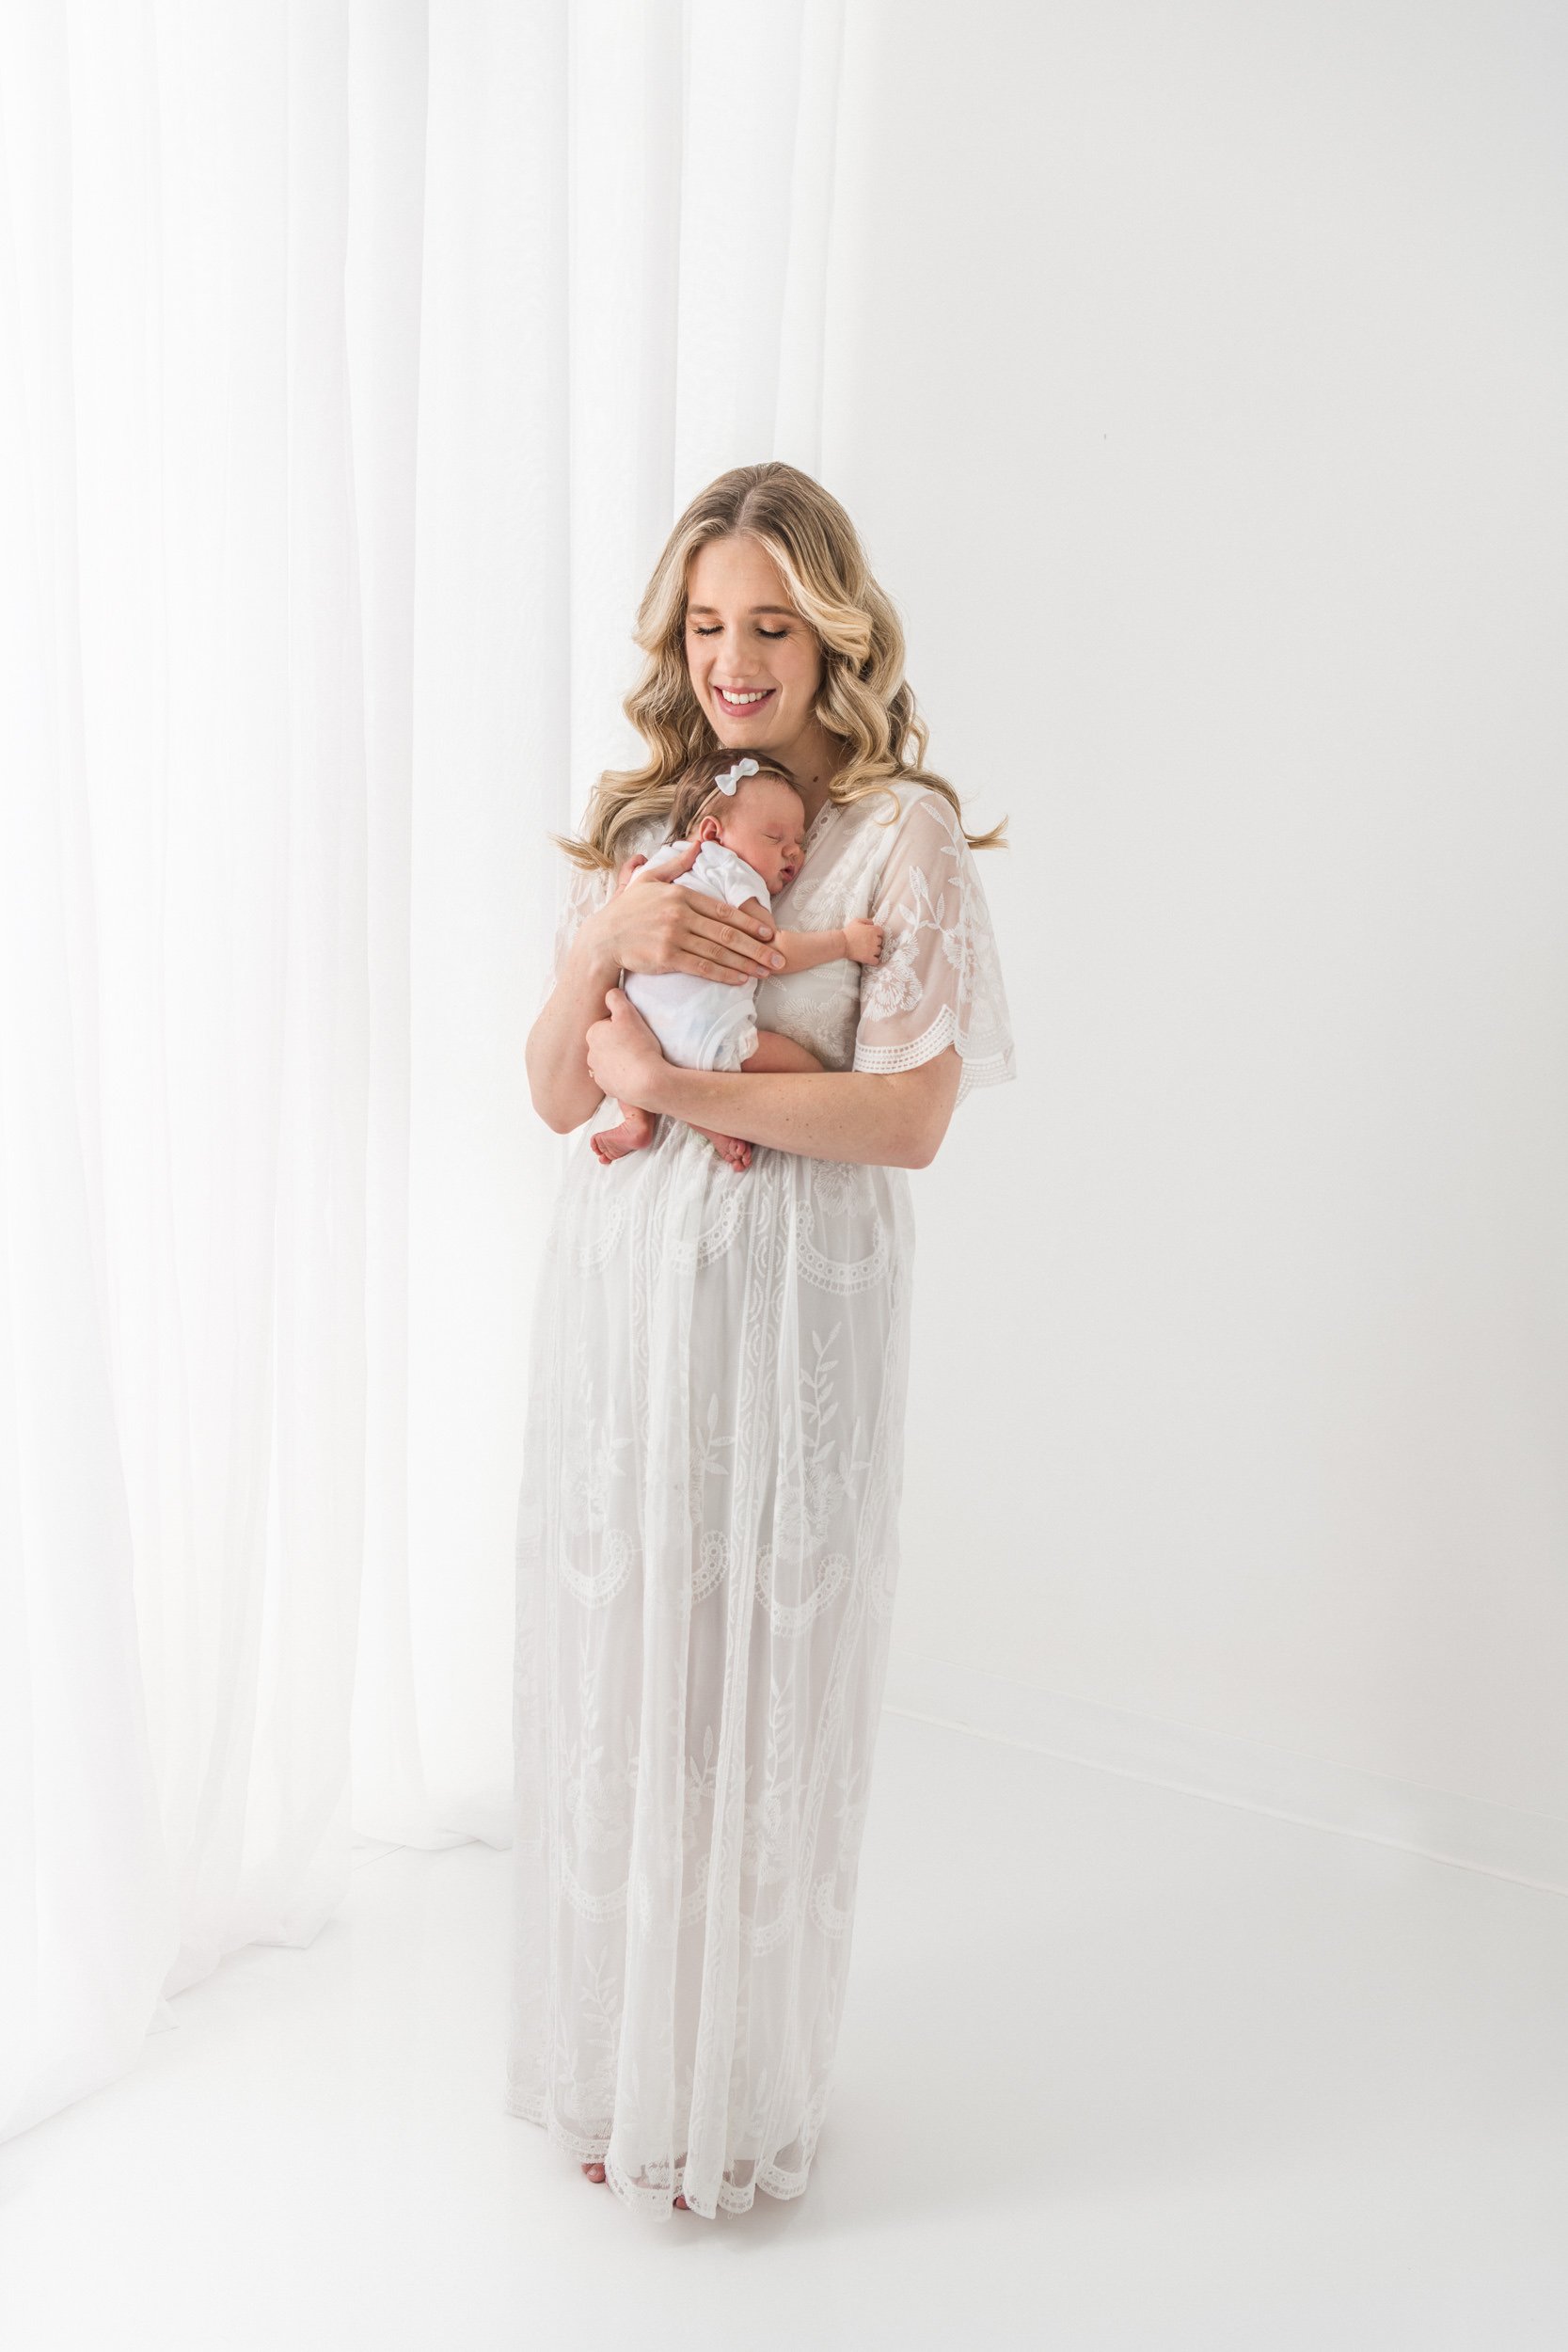  Mother in a white lace dress rocks her baby girl in her arms by Nicole Hawkins Photography. mother and baby motherhood #NicoleHawkinsPhotography #NicoleHawkinsNewborns #StudioPhotography #NewYorkPhotographer #NJphotographers #newborn 